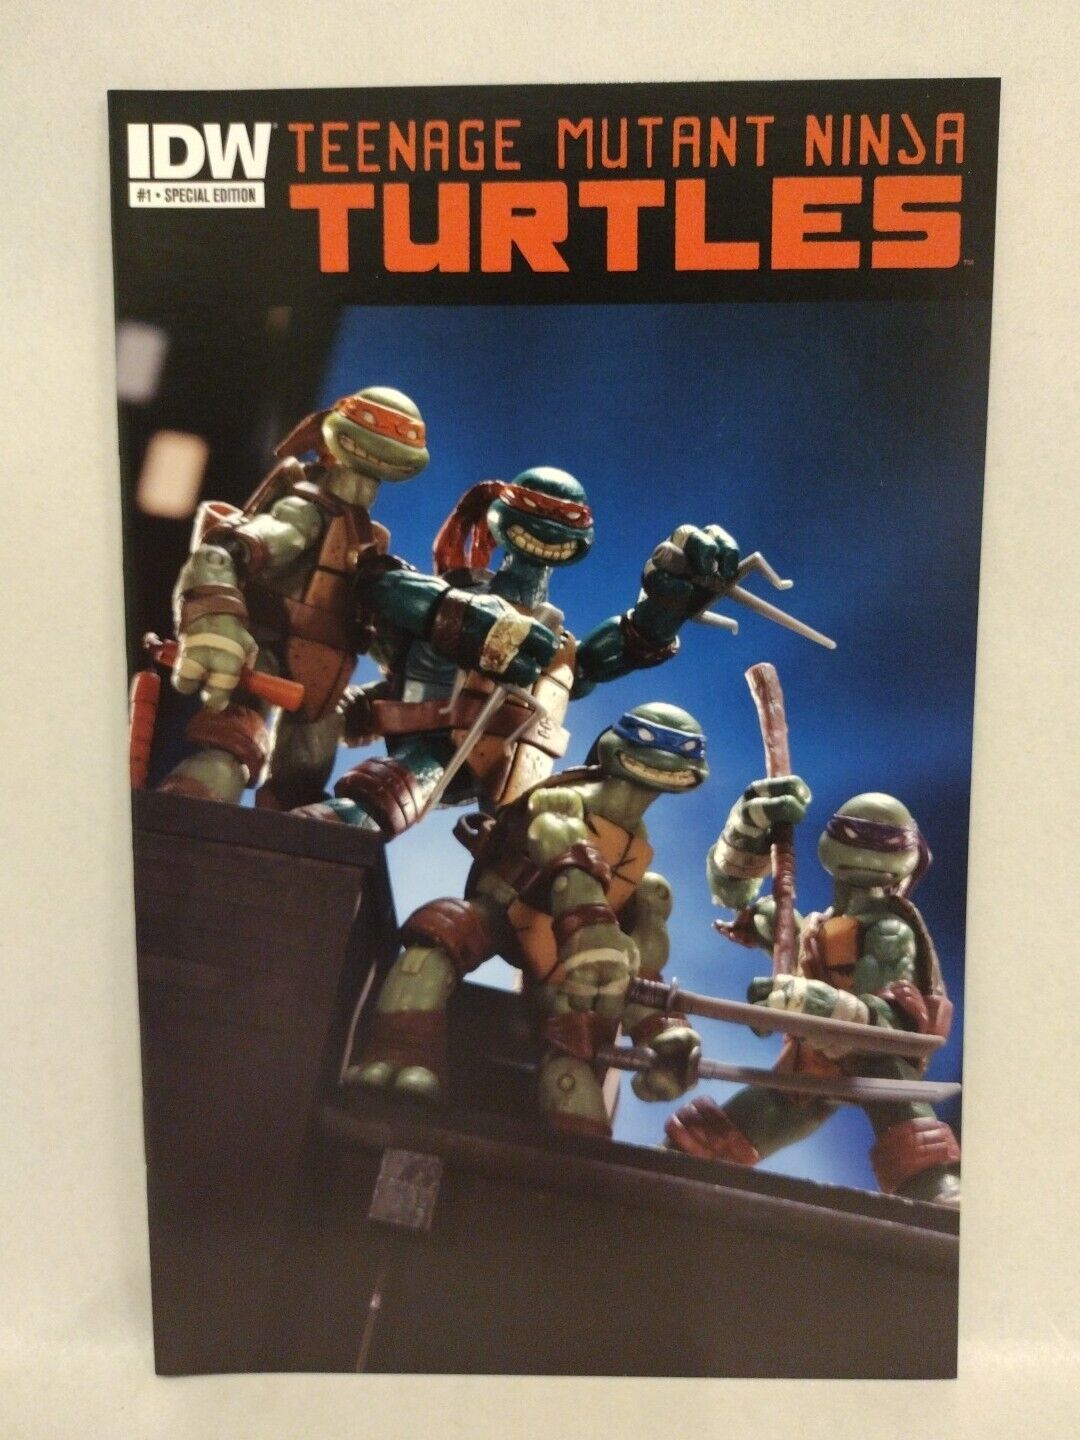 TMNT (2012) Special Edition IDW Action Figure Ashcan Mini Comic NM